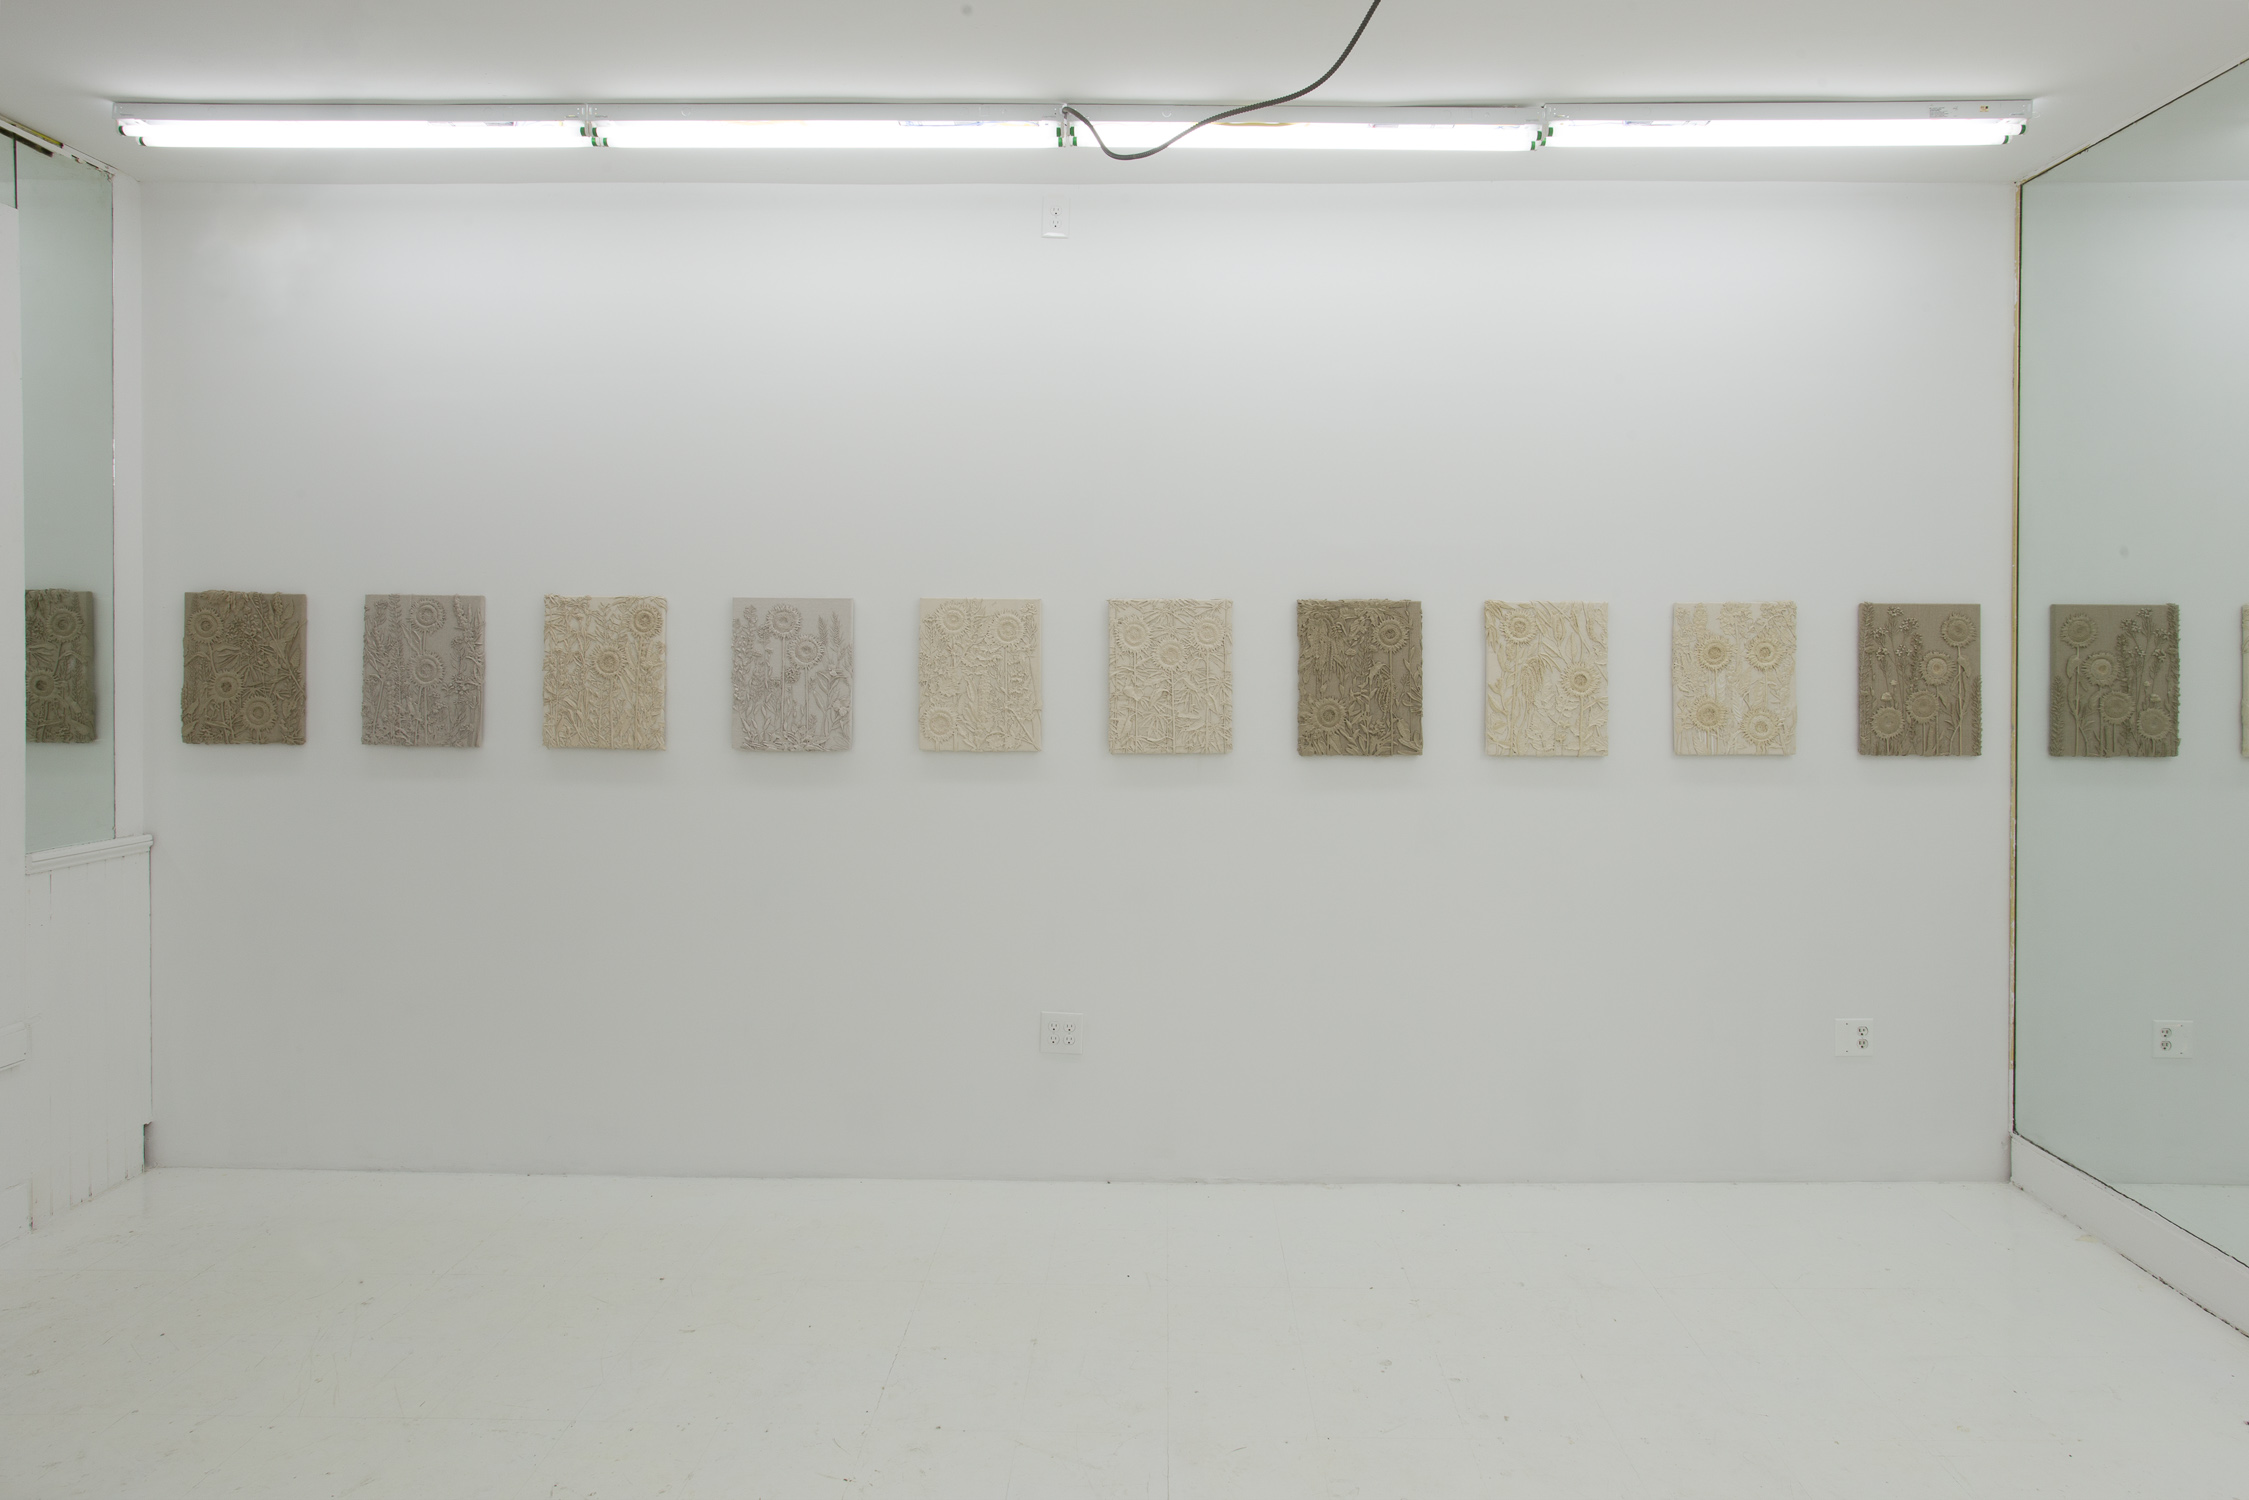 Ten wall works ranging in color from white to brown, flanked on each side by a mirror